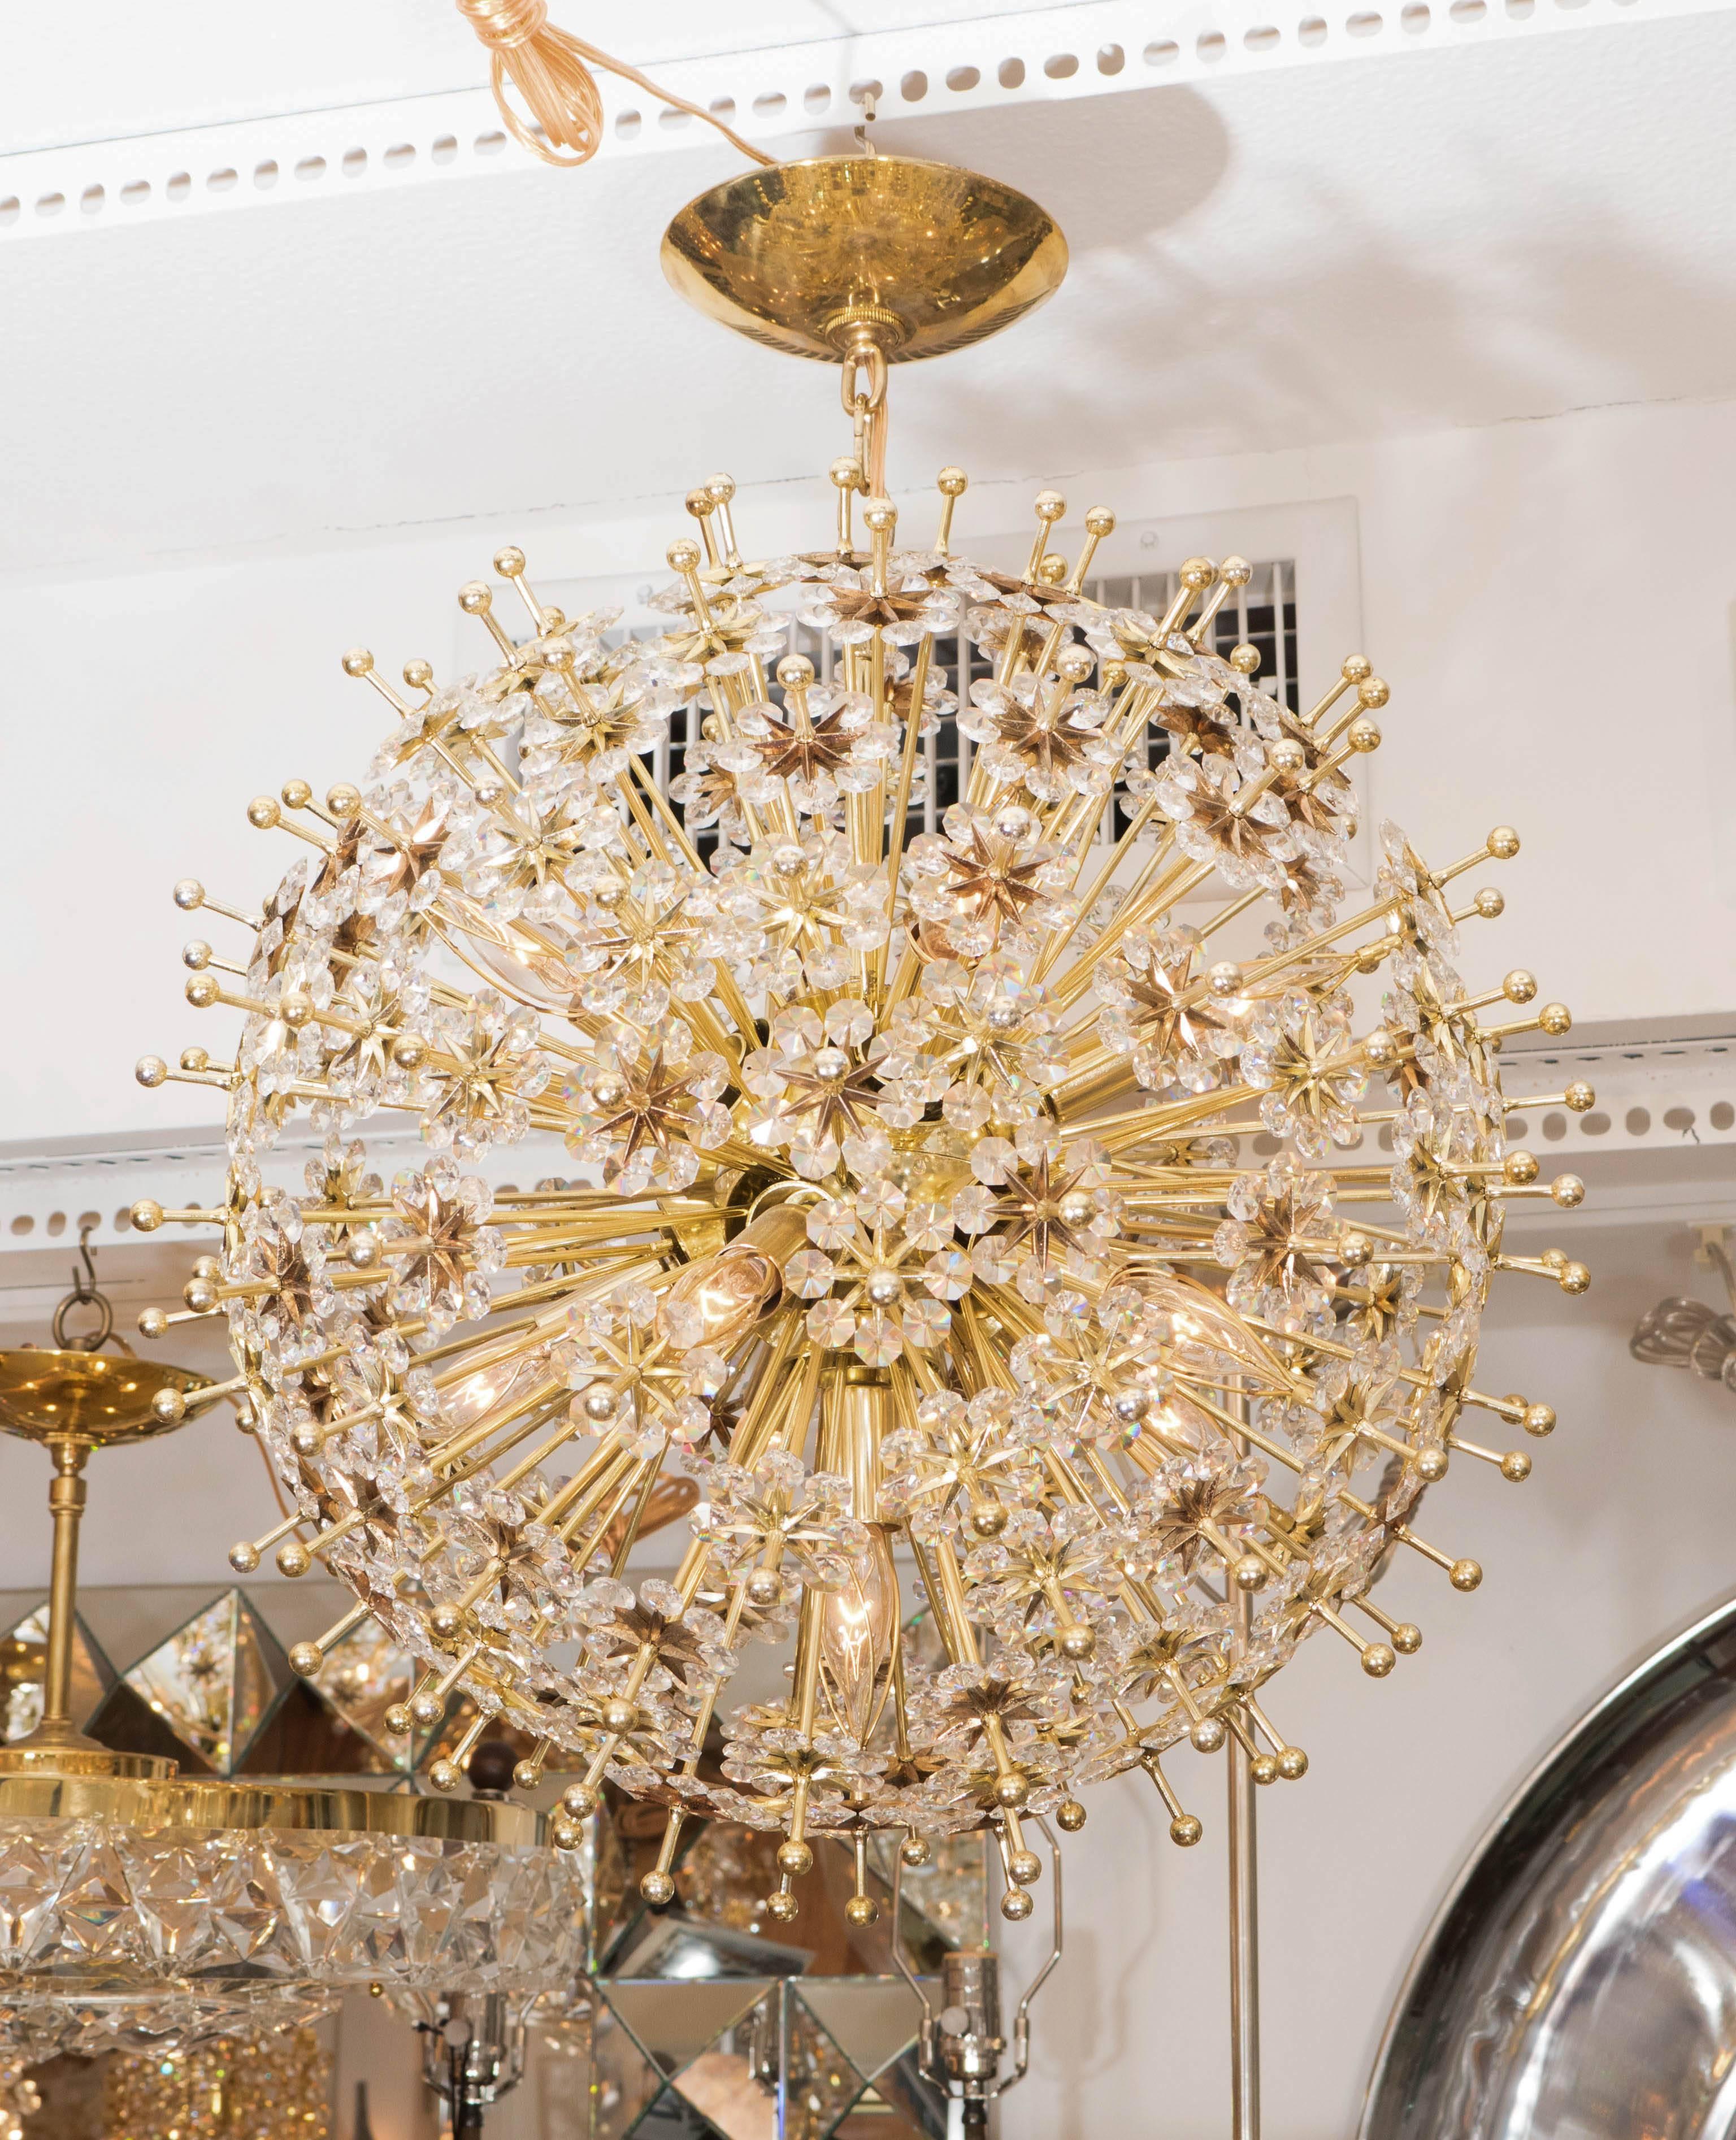 Brass starburst pendant ceiling fixture with rays terminating in flowers composed of cut crystal elements.